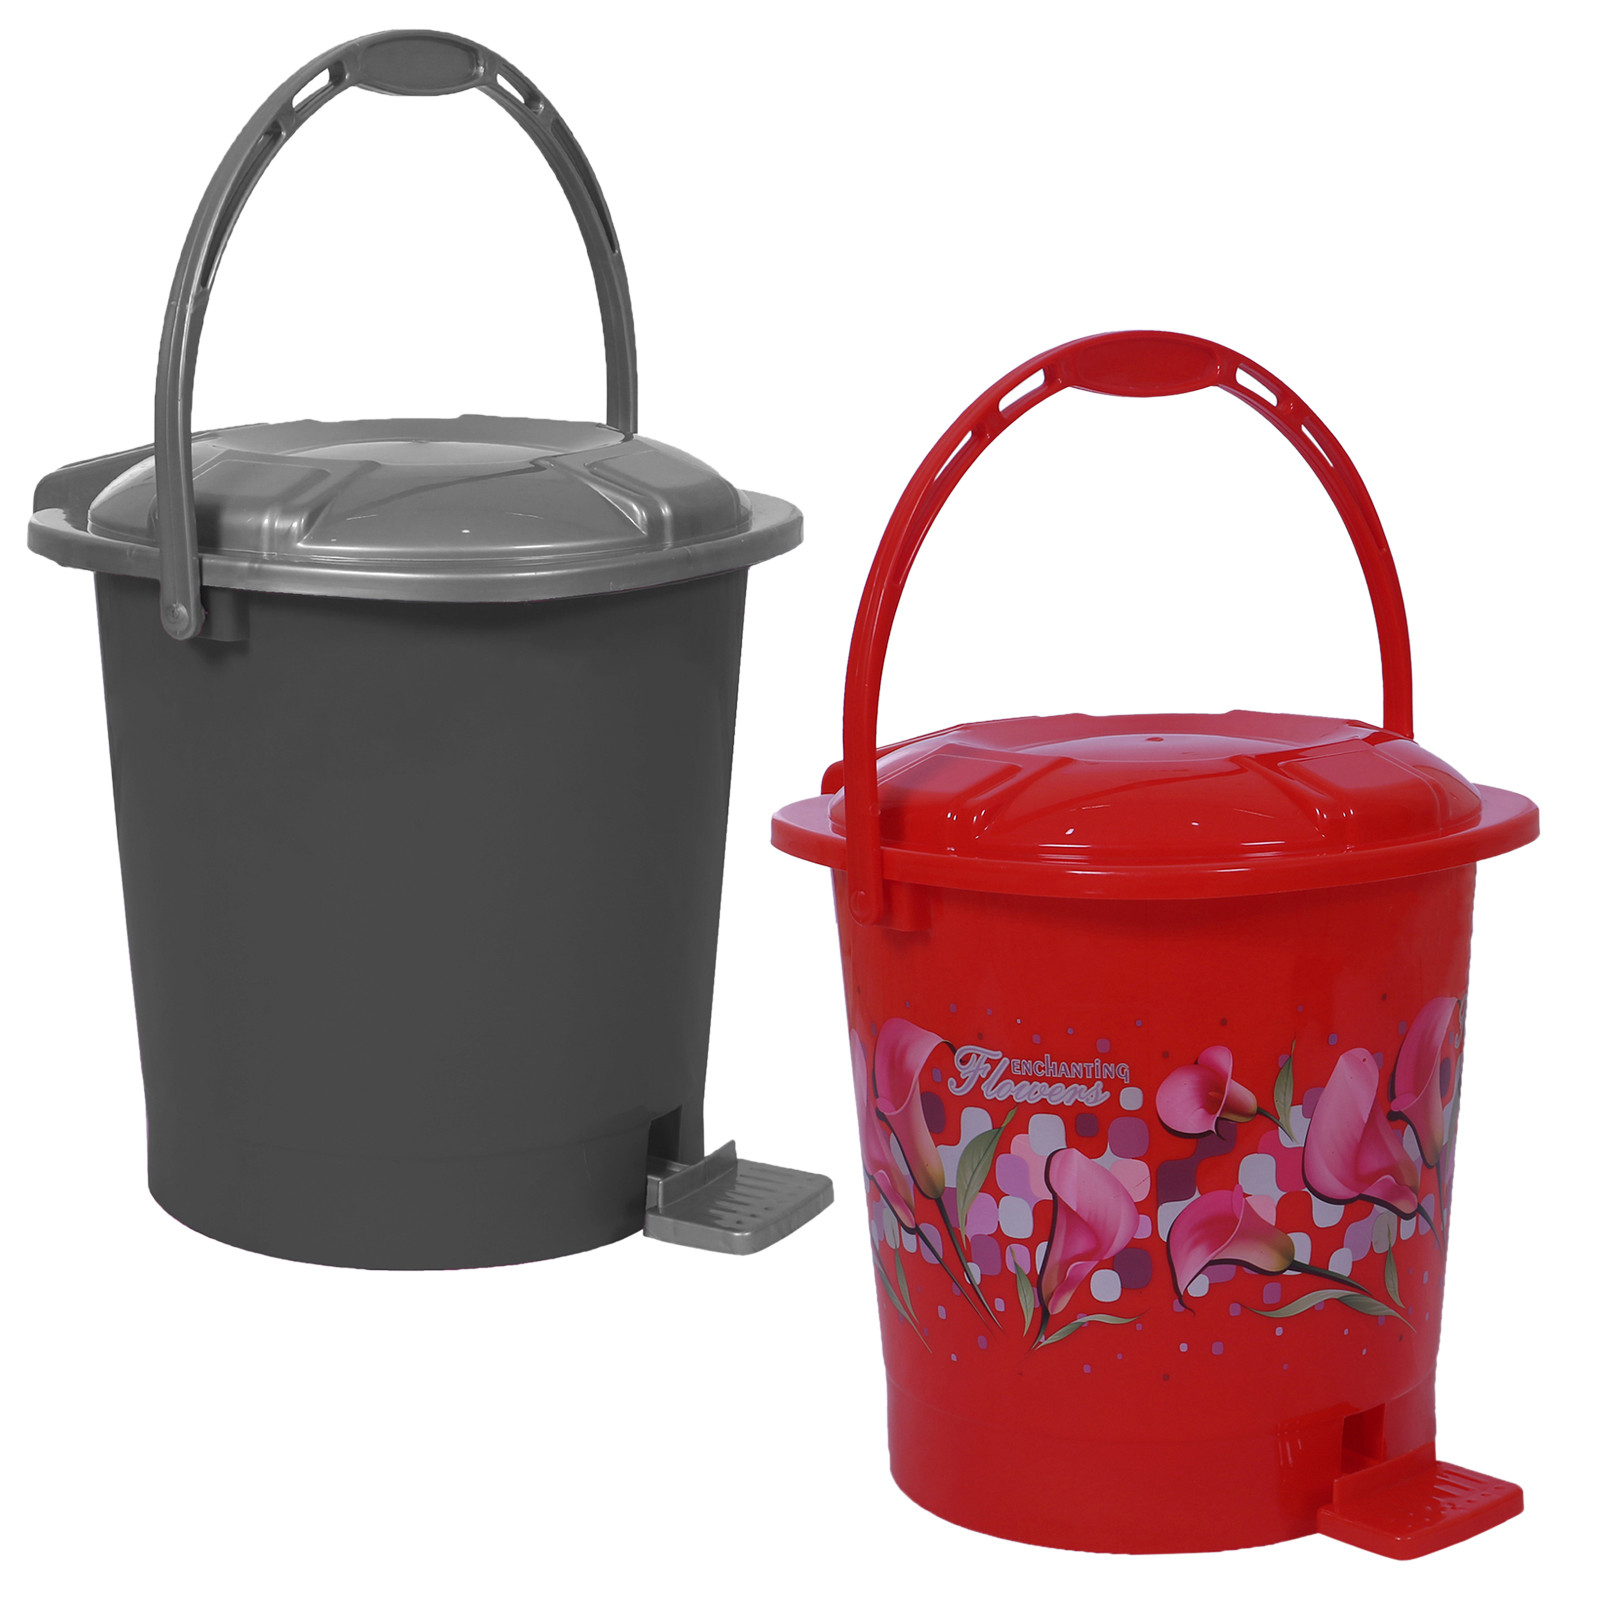 Kuber Industries Durable Plastic Pedal Dustbin|Waste Bin|Trash Can For Kitchen & Home With Handle,7 Litre,Pack of 2 (Gray & Red)